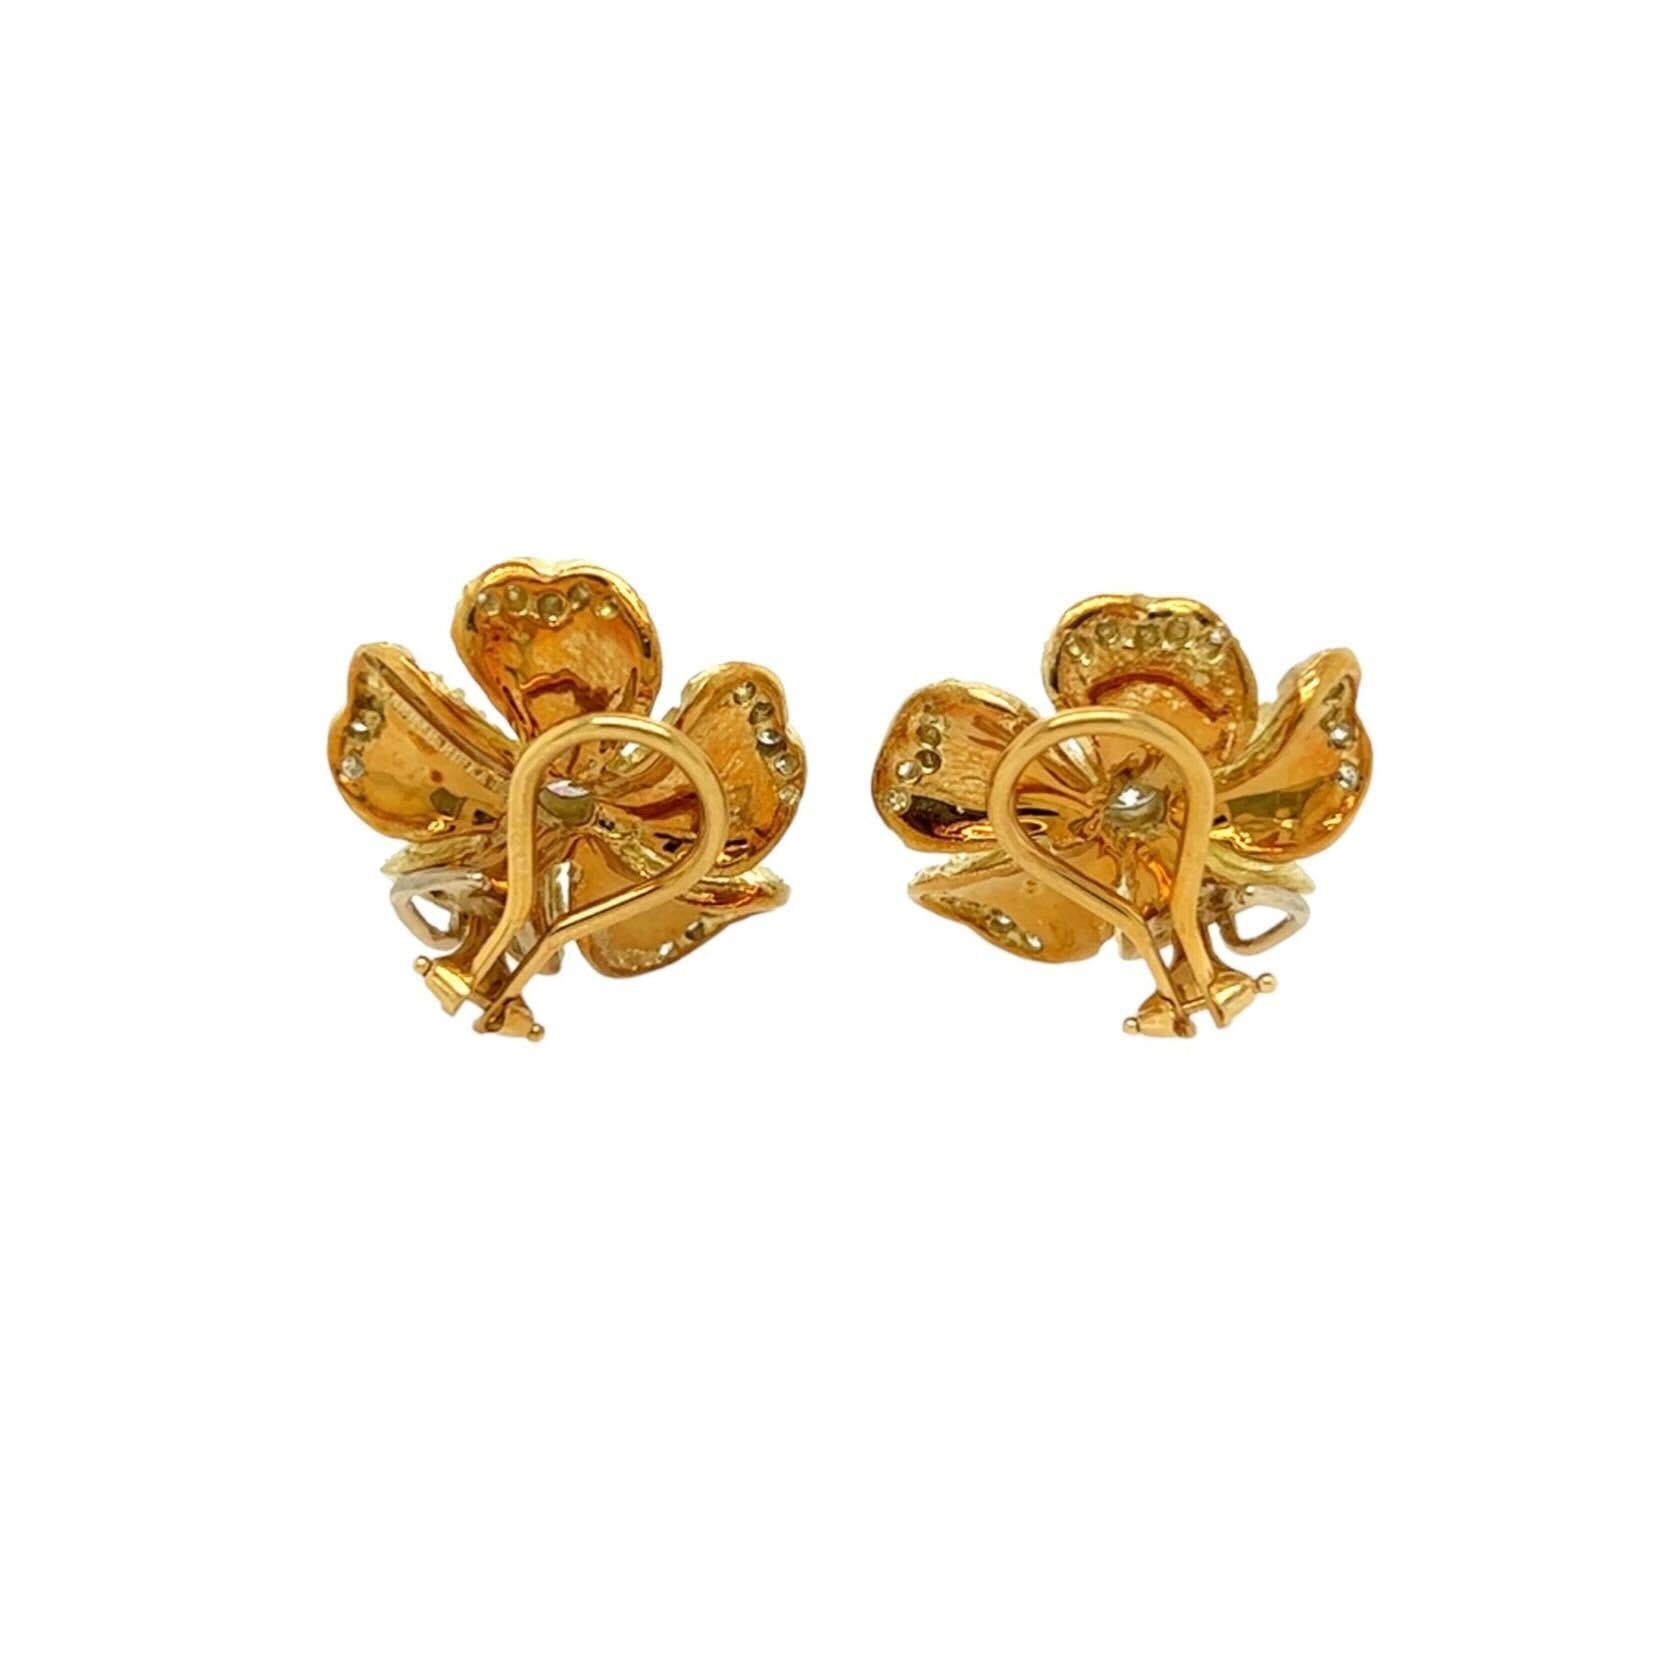 A pair of 18 karat yellow gold and diamond earclips, Judith Ripka.  Each earclip designed as flower with matte gold textured petals, the curling edges of the petals set with twenty five (25) round brilliant cut diamonds, the flower centering a bezel